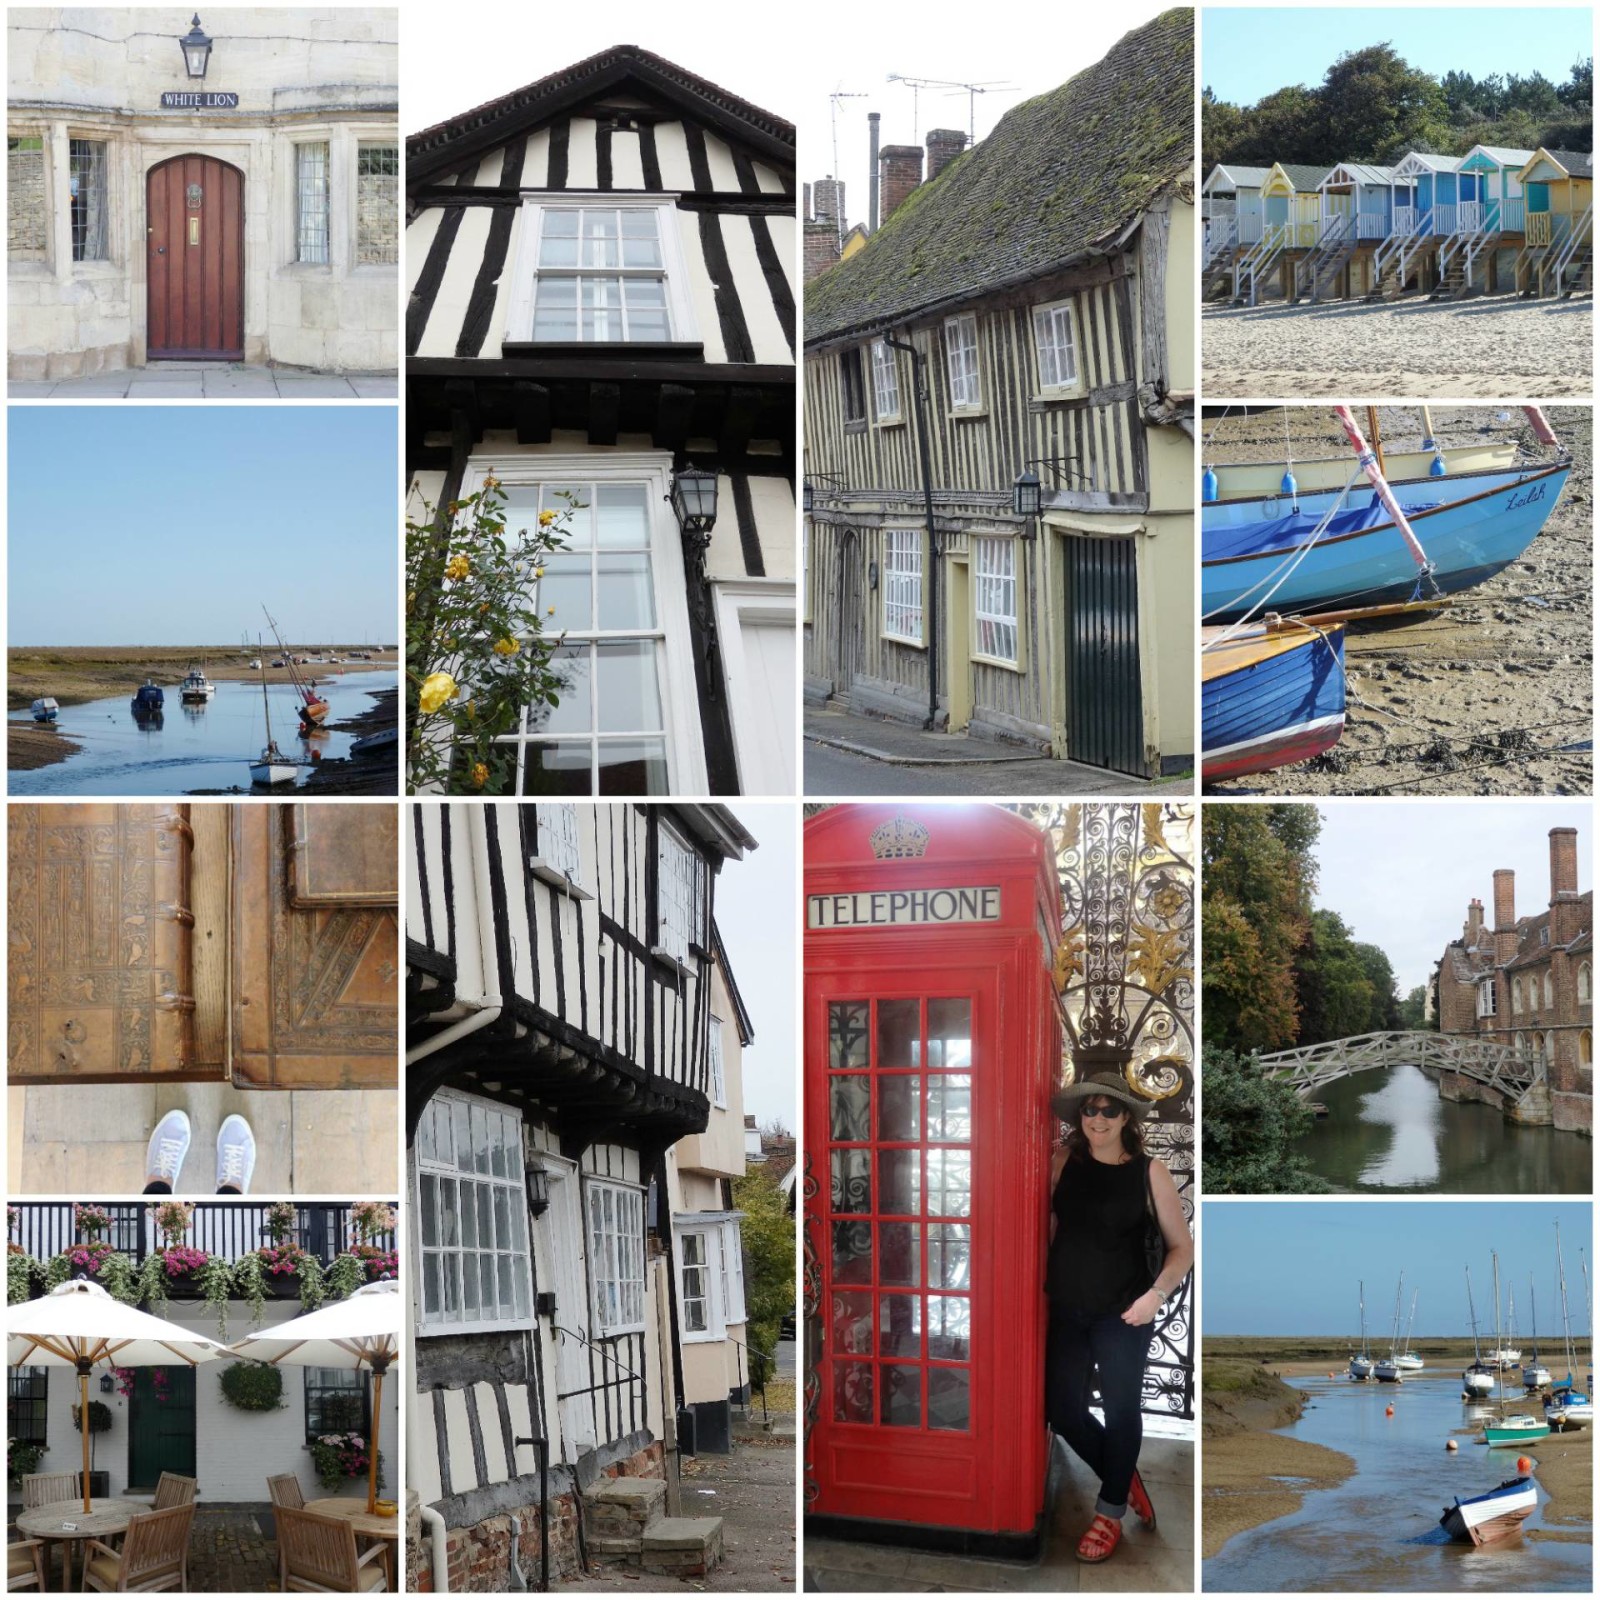 Where-Did-the-Wind-Blow-Me-and-a-few-other-reflections-My-2015-Review-England-Day-Trips